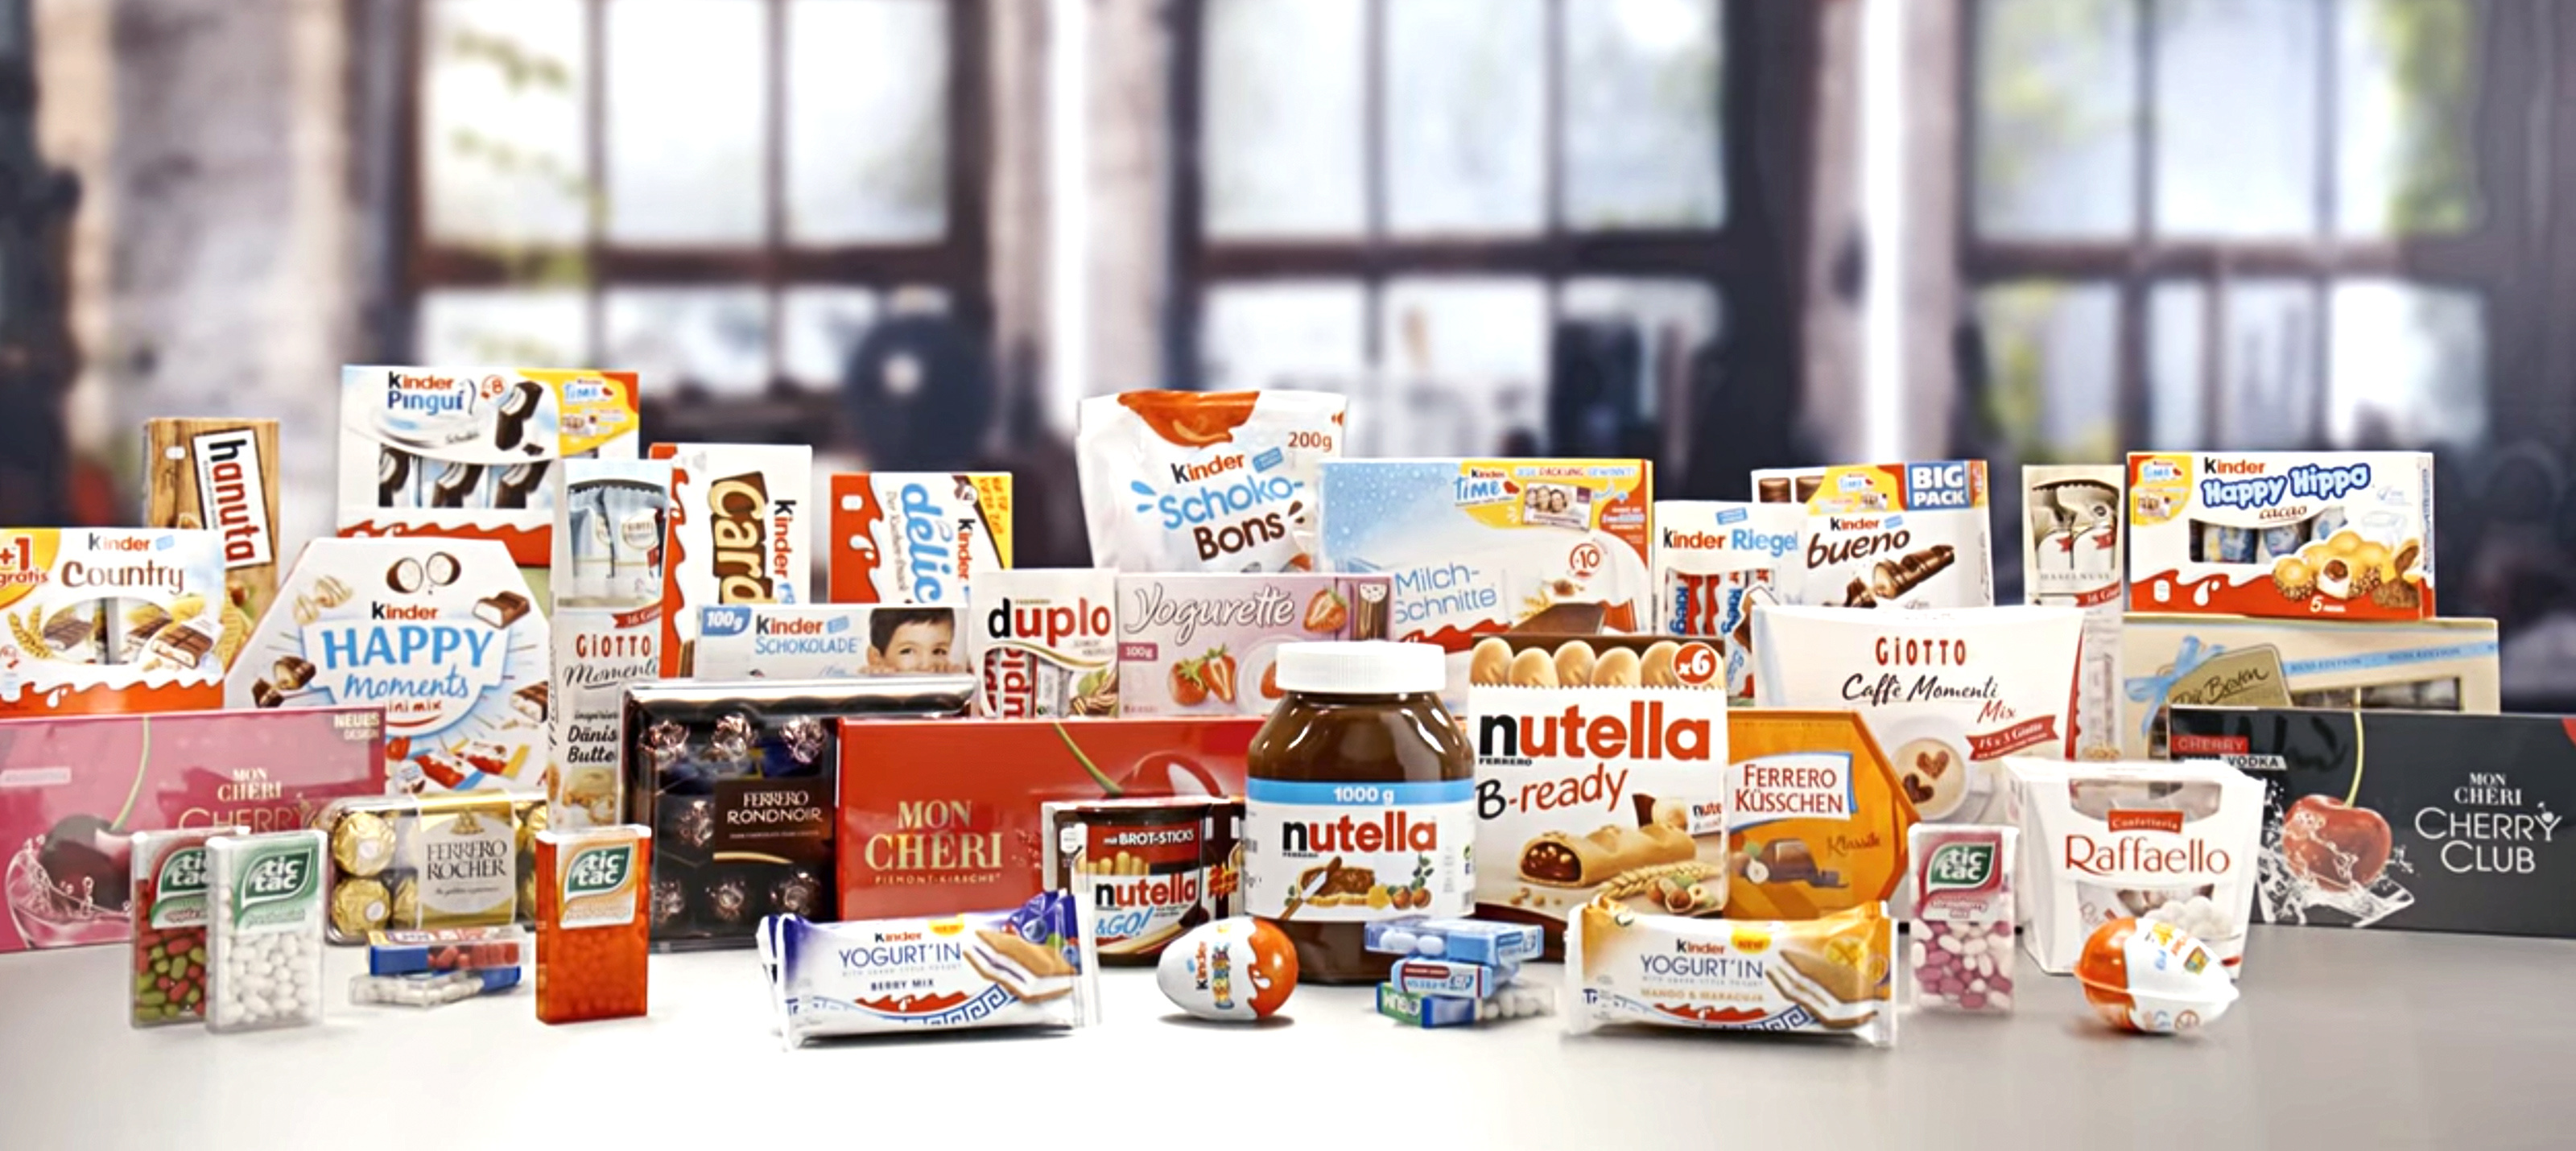 Kinder (Brand): Ferrero Group, A manufacturer of branded chocolate and confectionery products. 3200x1430 Dual Screen Background.